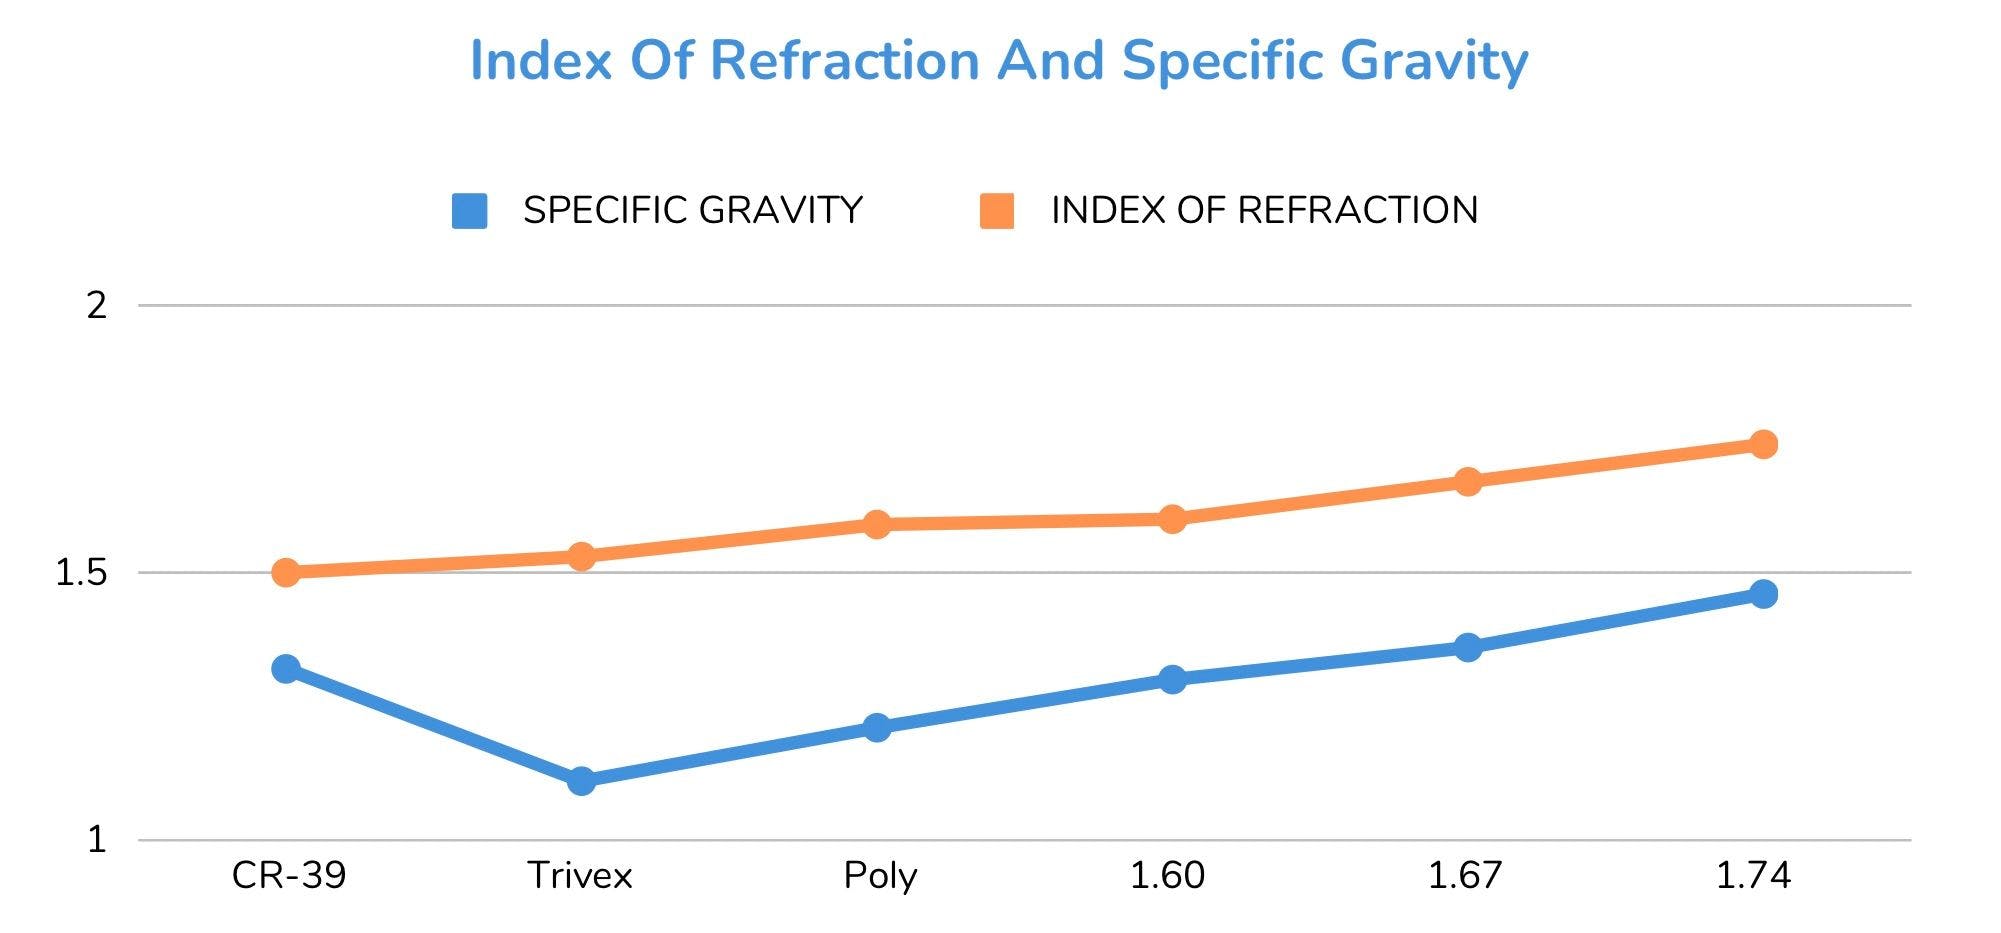 Index of refraction and specific gravity